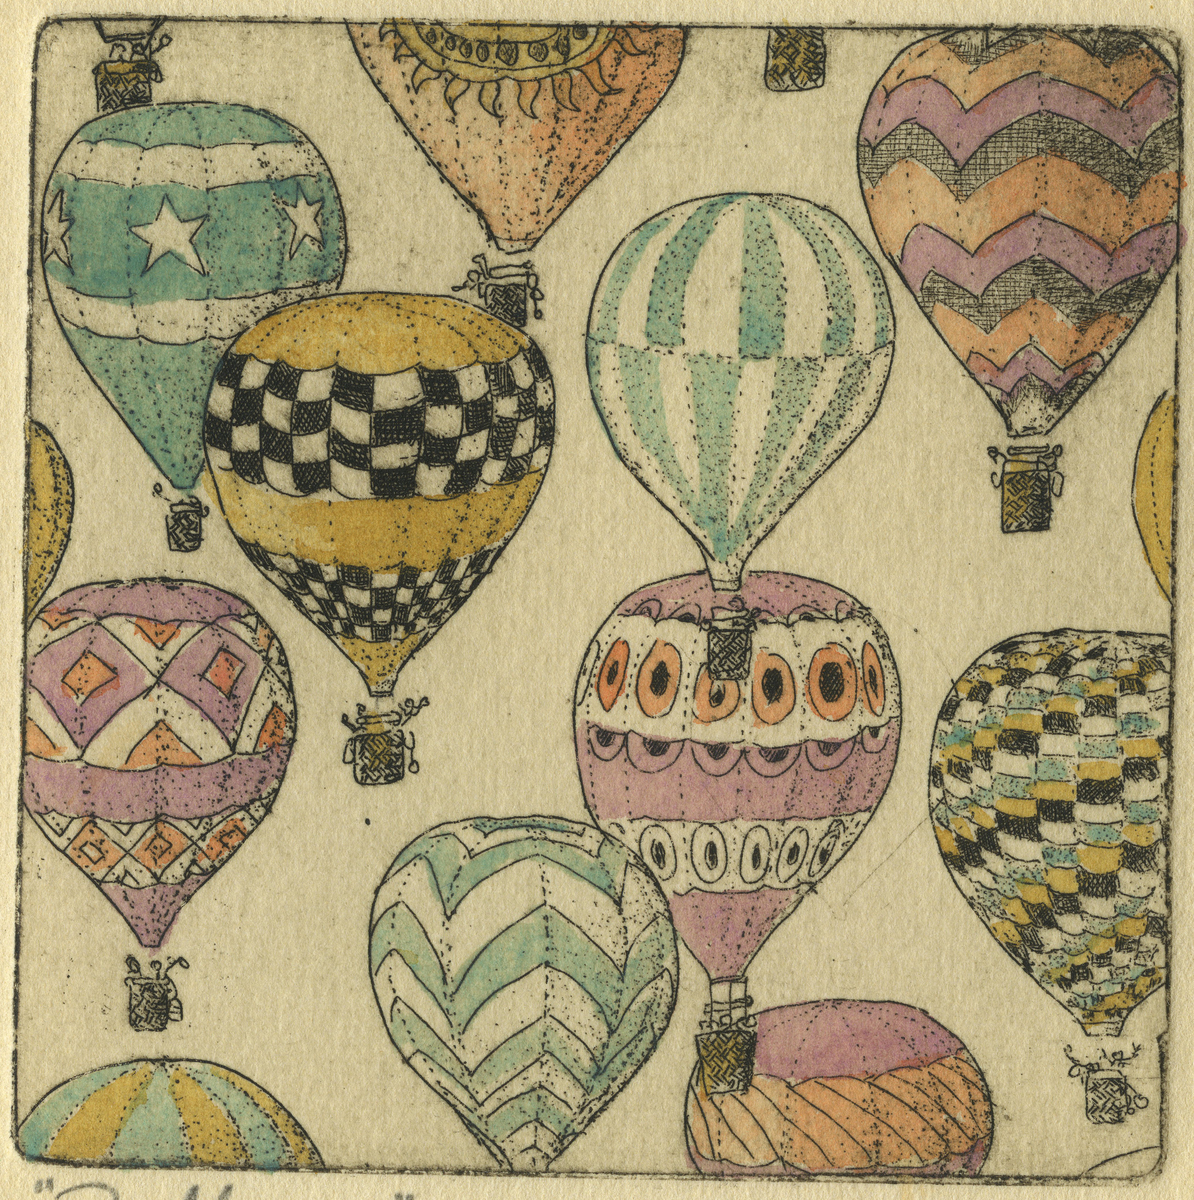 Balloons : Congregated Images